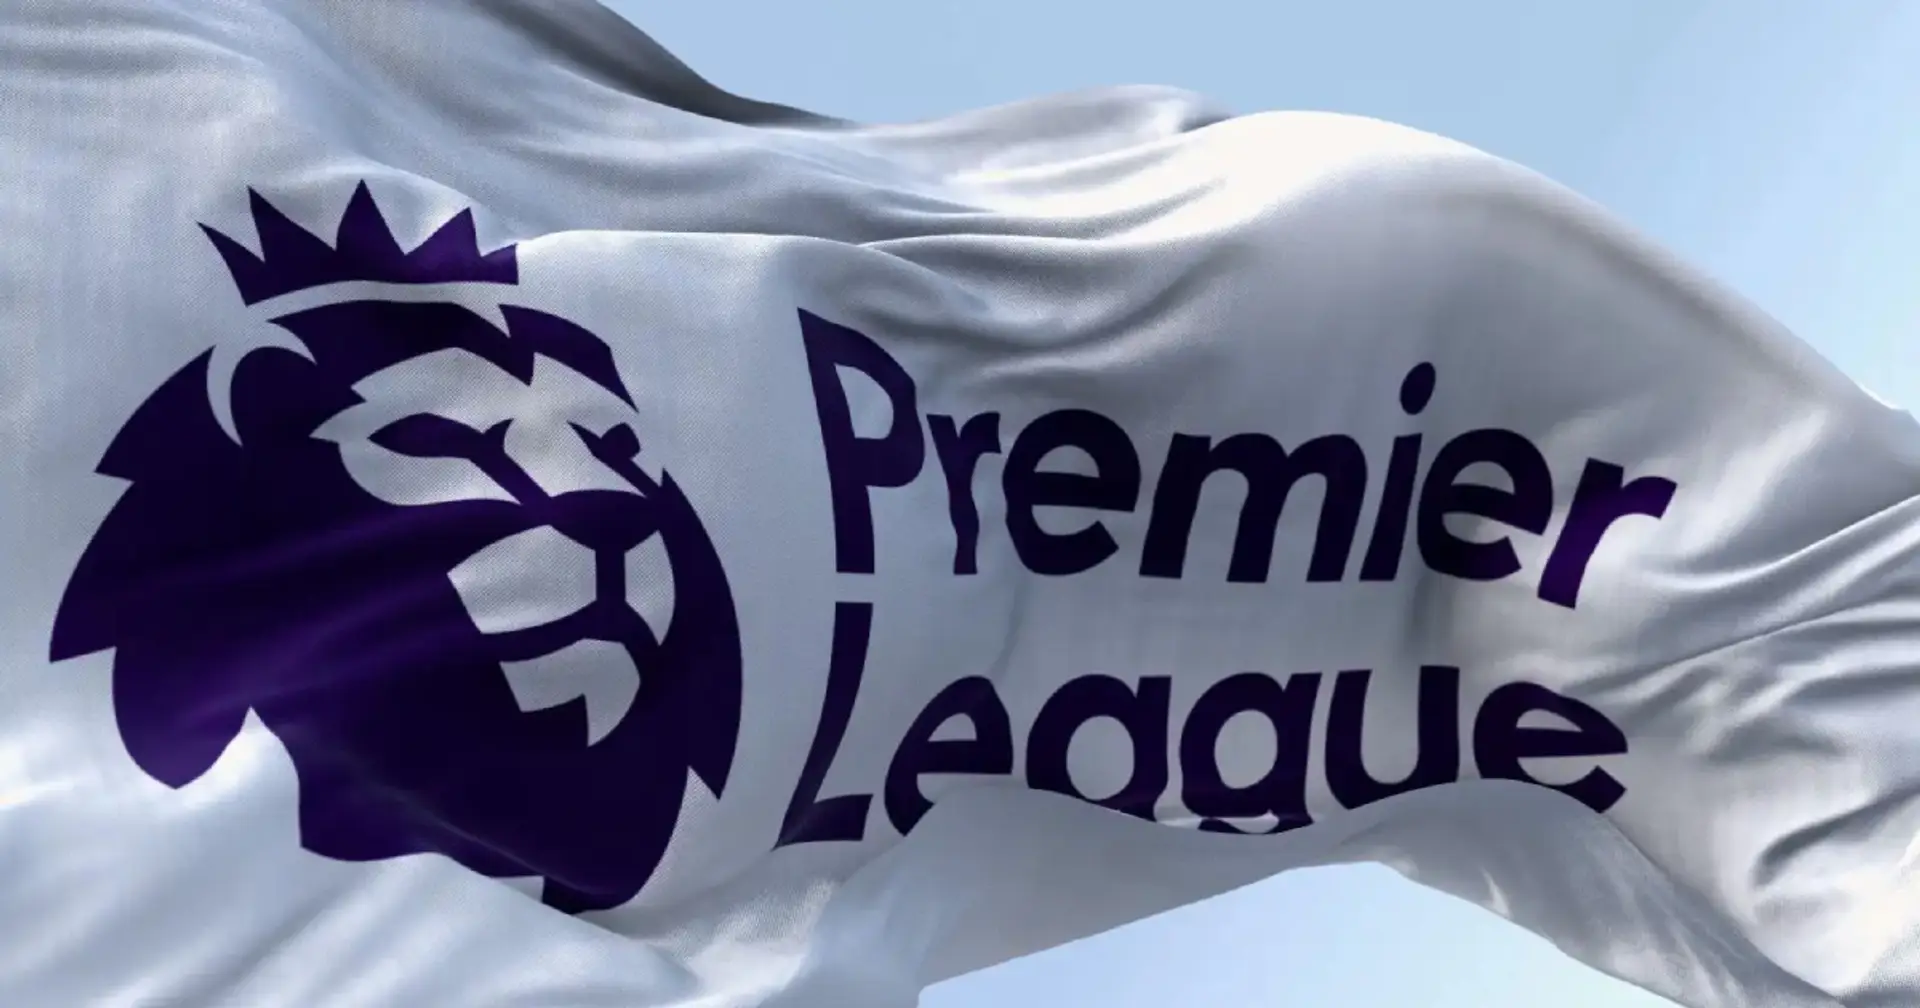 Dates for next Premier League season confirmed: how Chelsea will be affected by it — explained